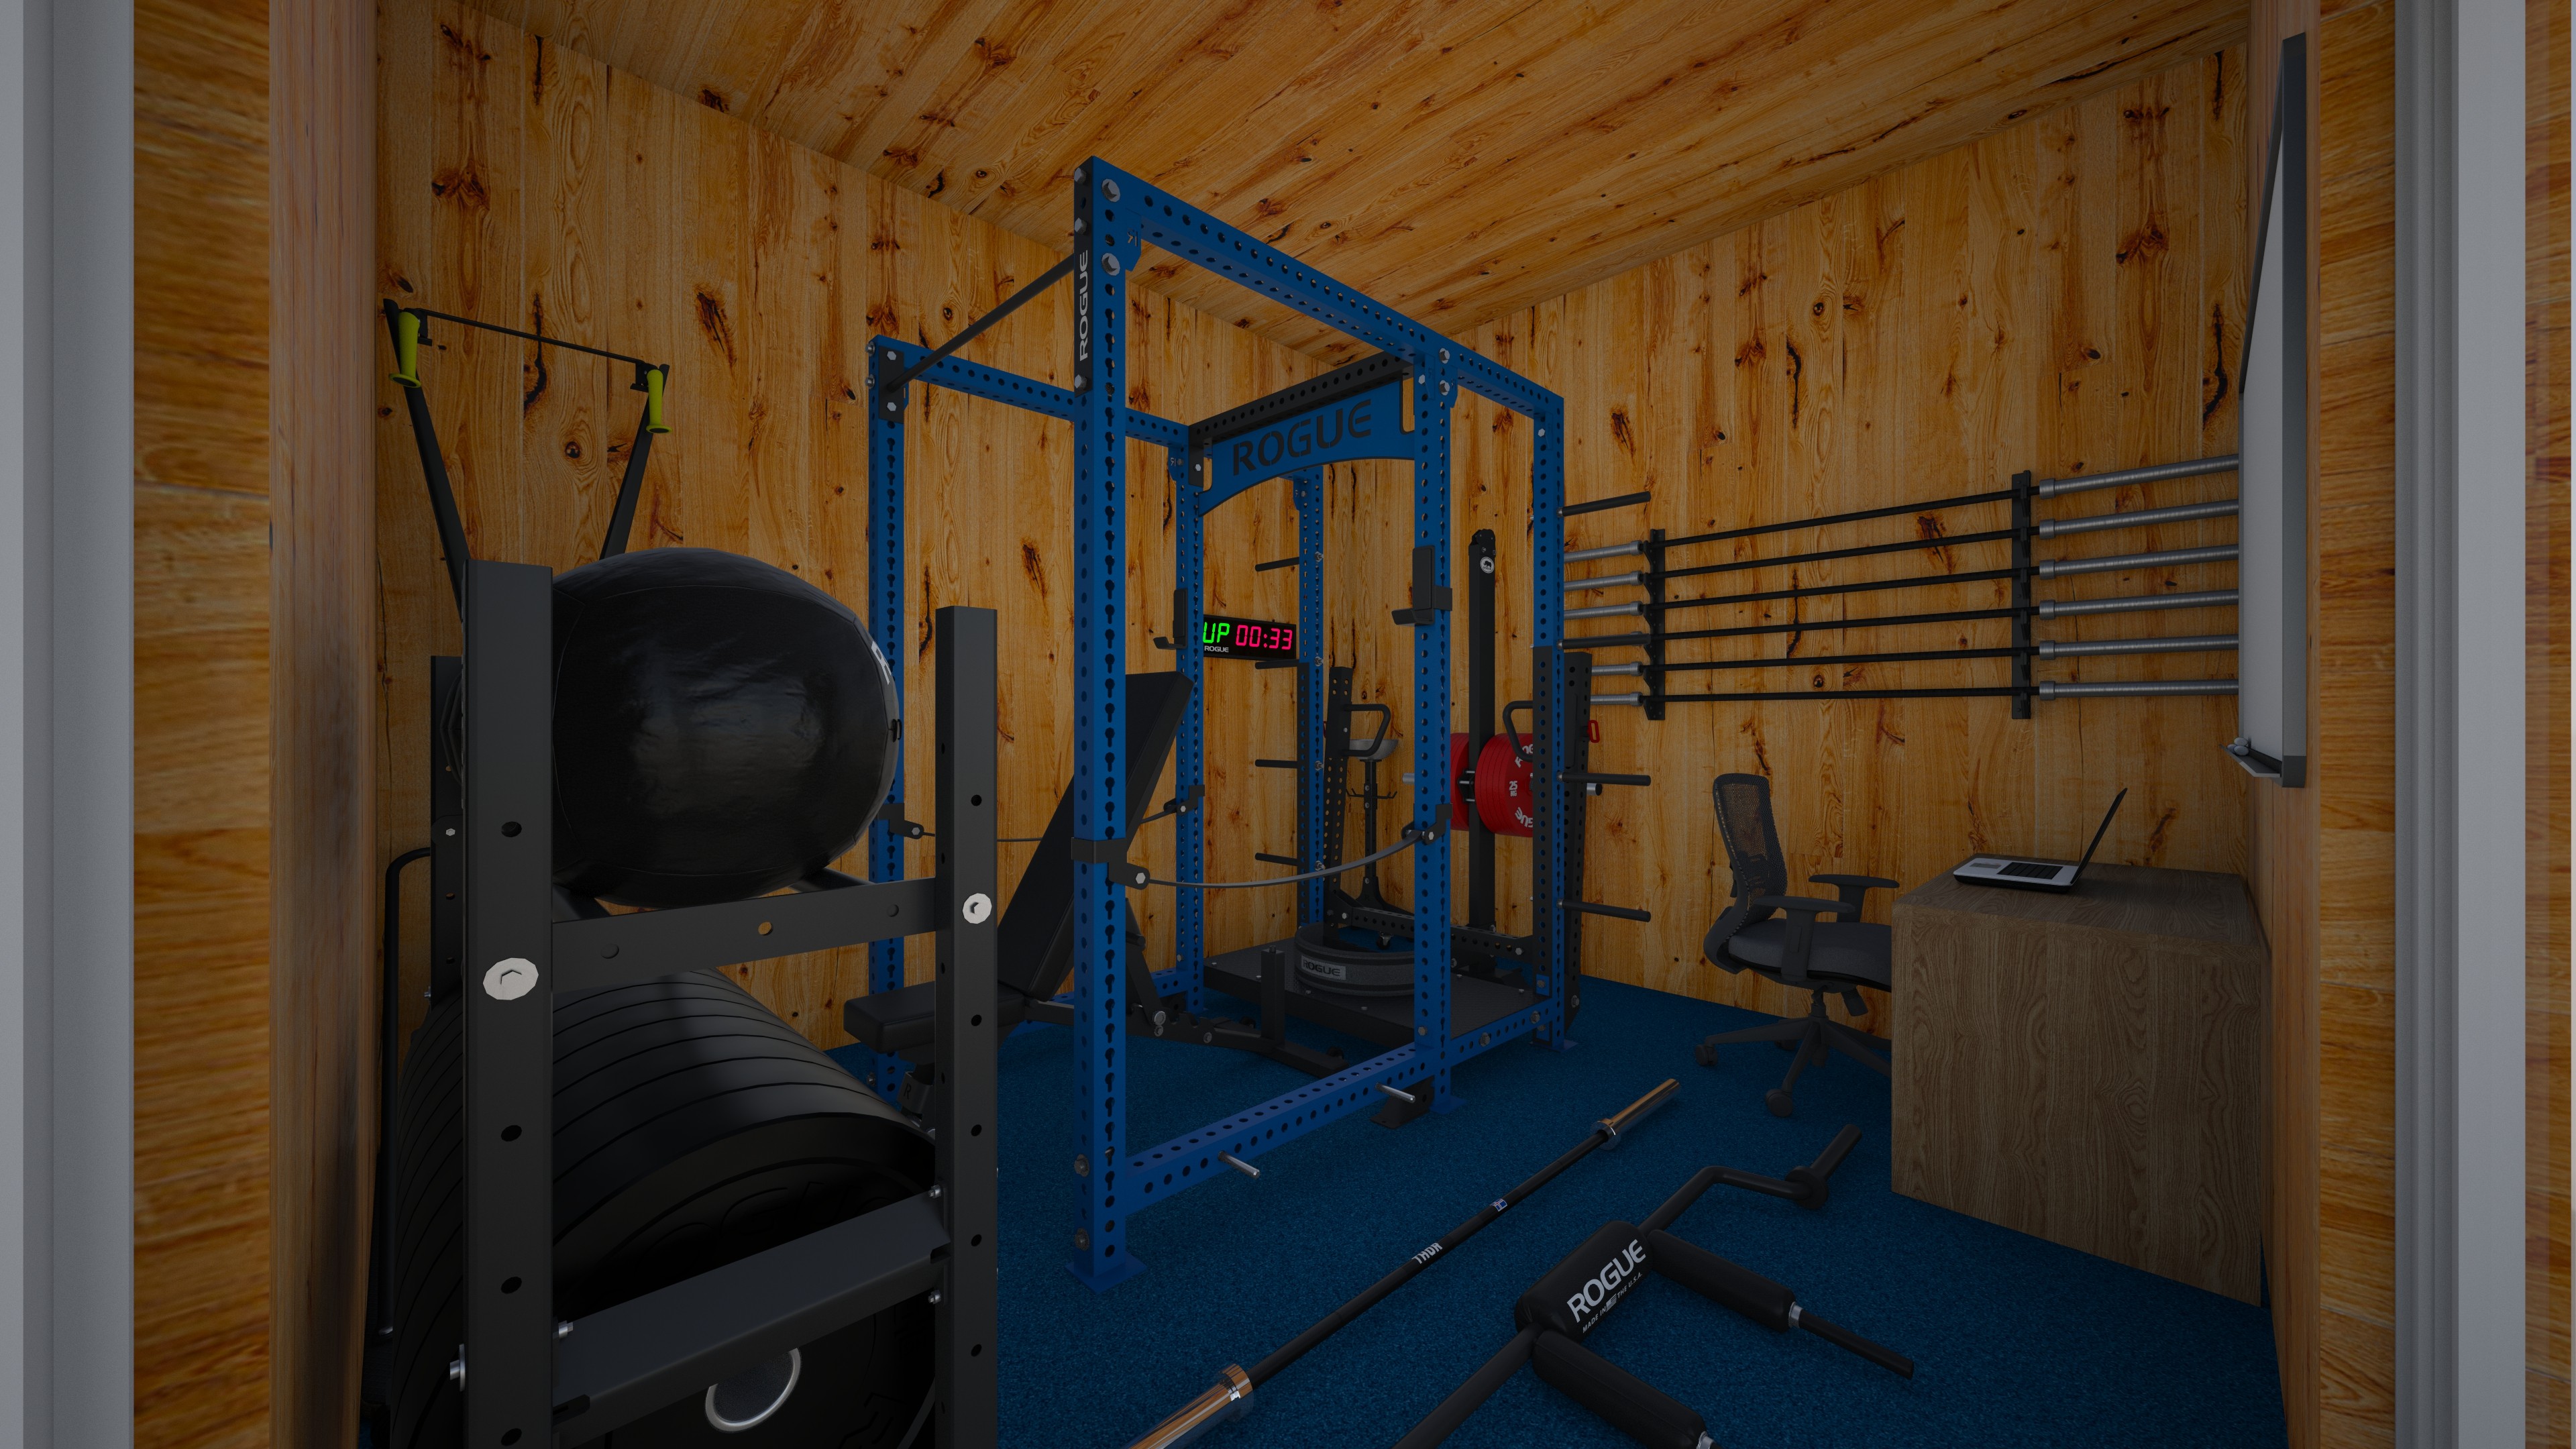 Basement gym example 160 square foot